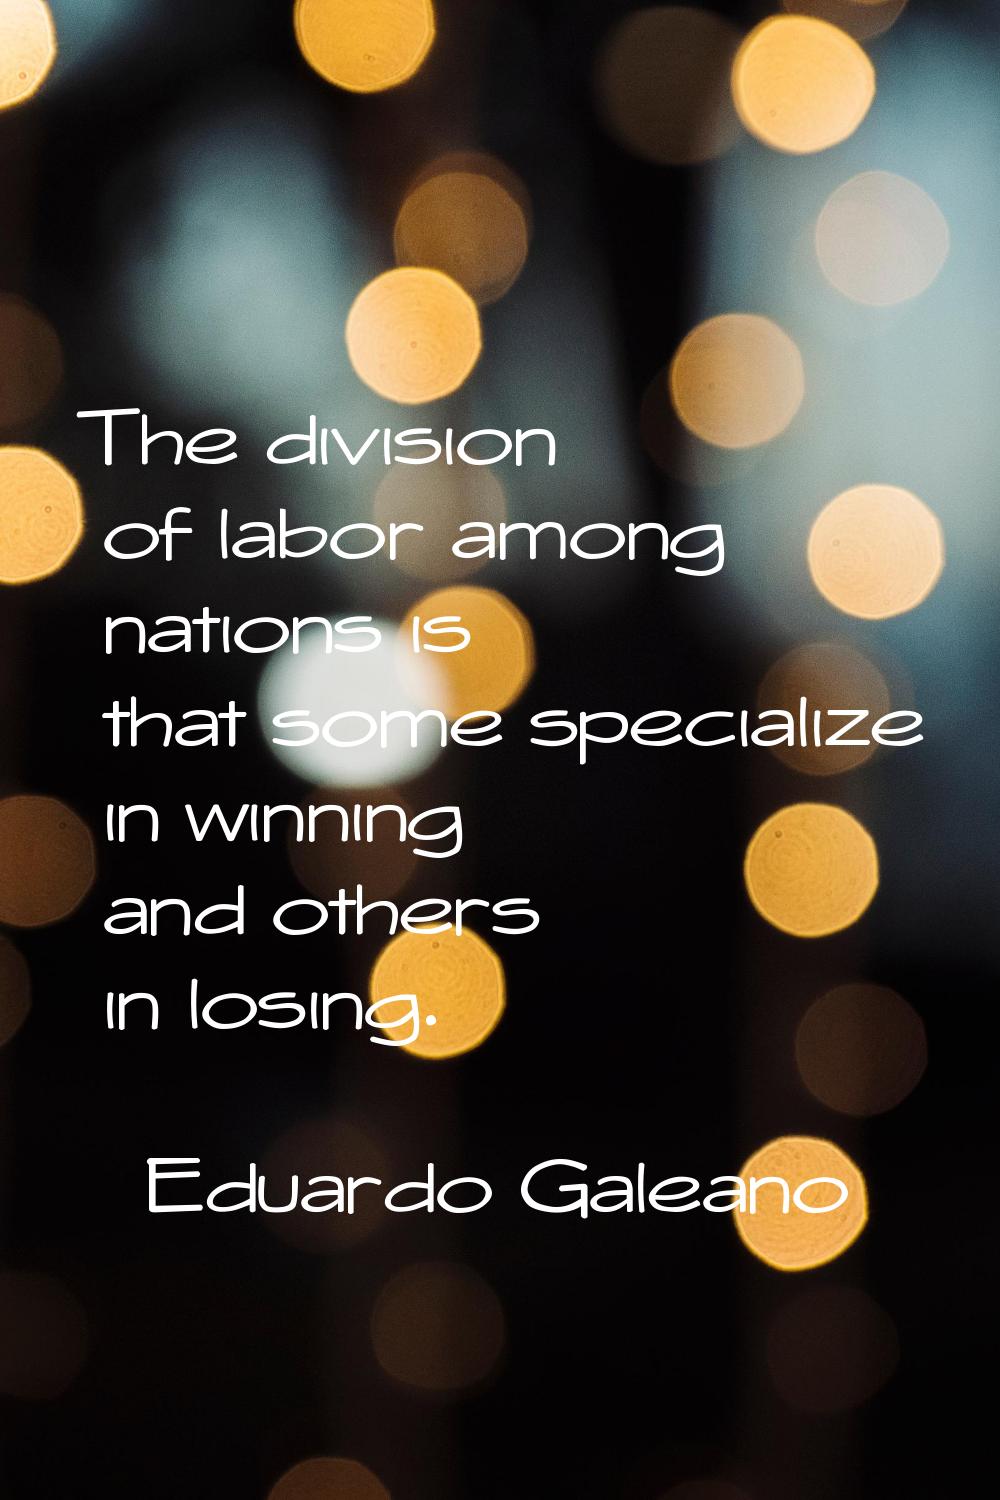 The division of labor among nations is that some specialize in winning and others in losing.